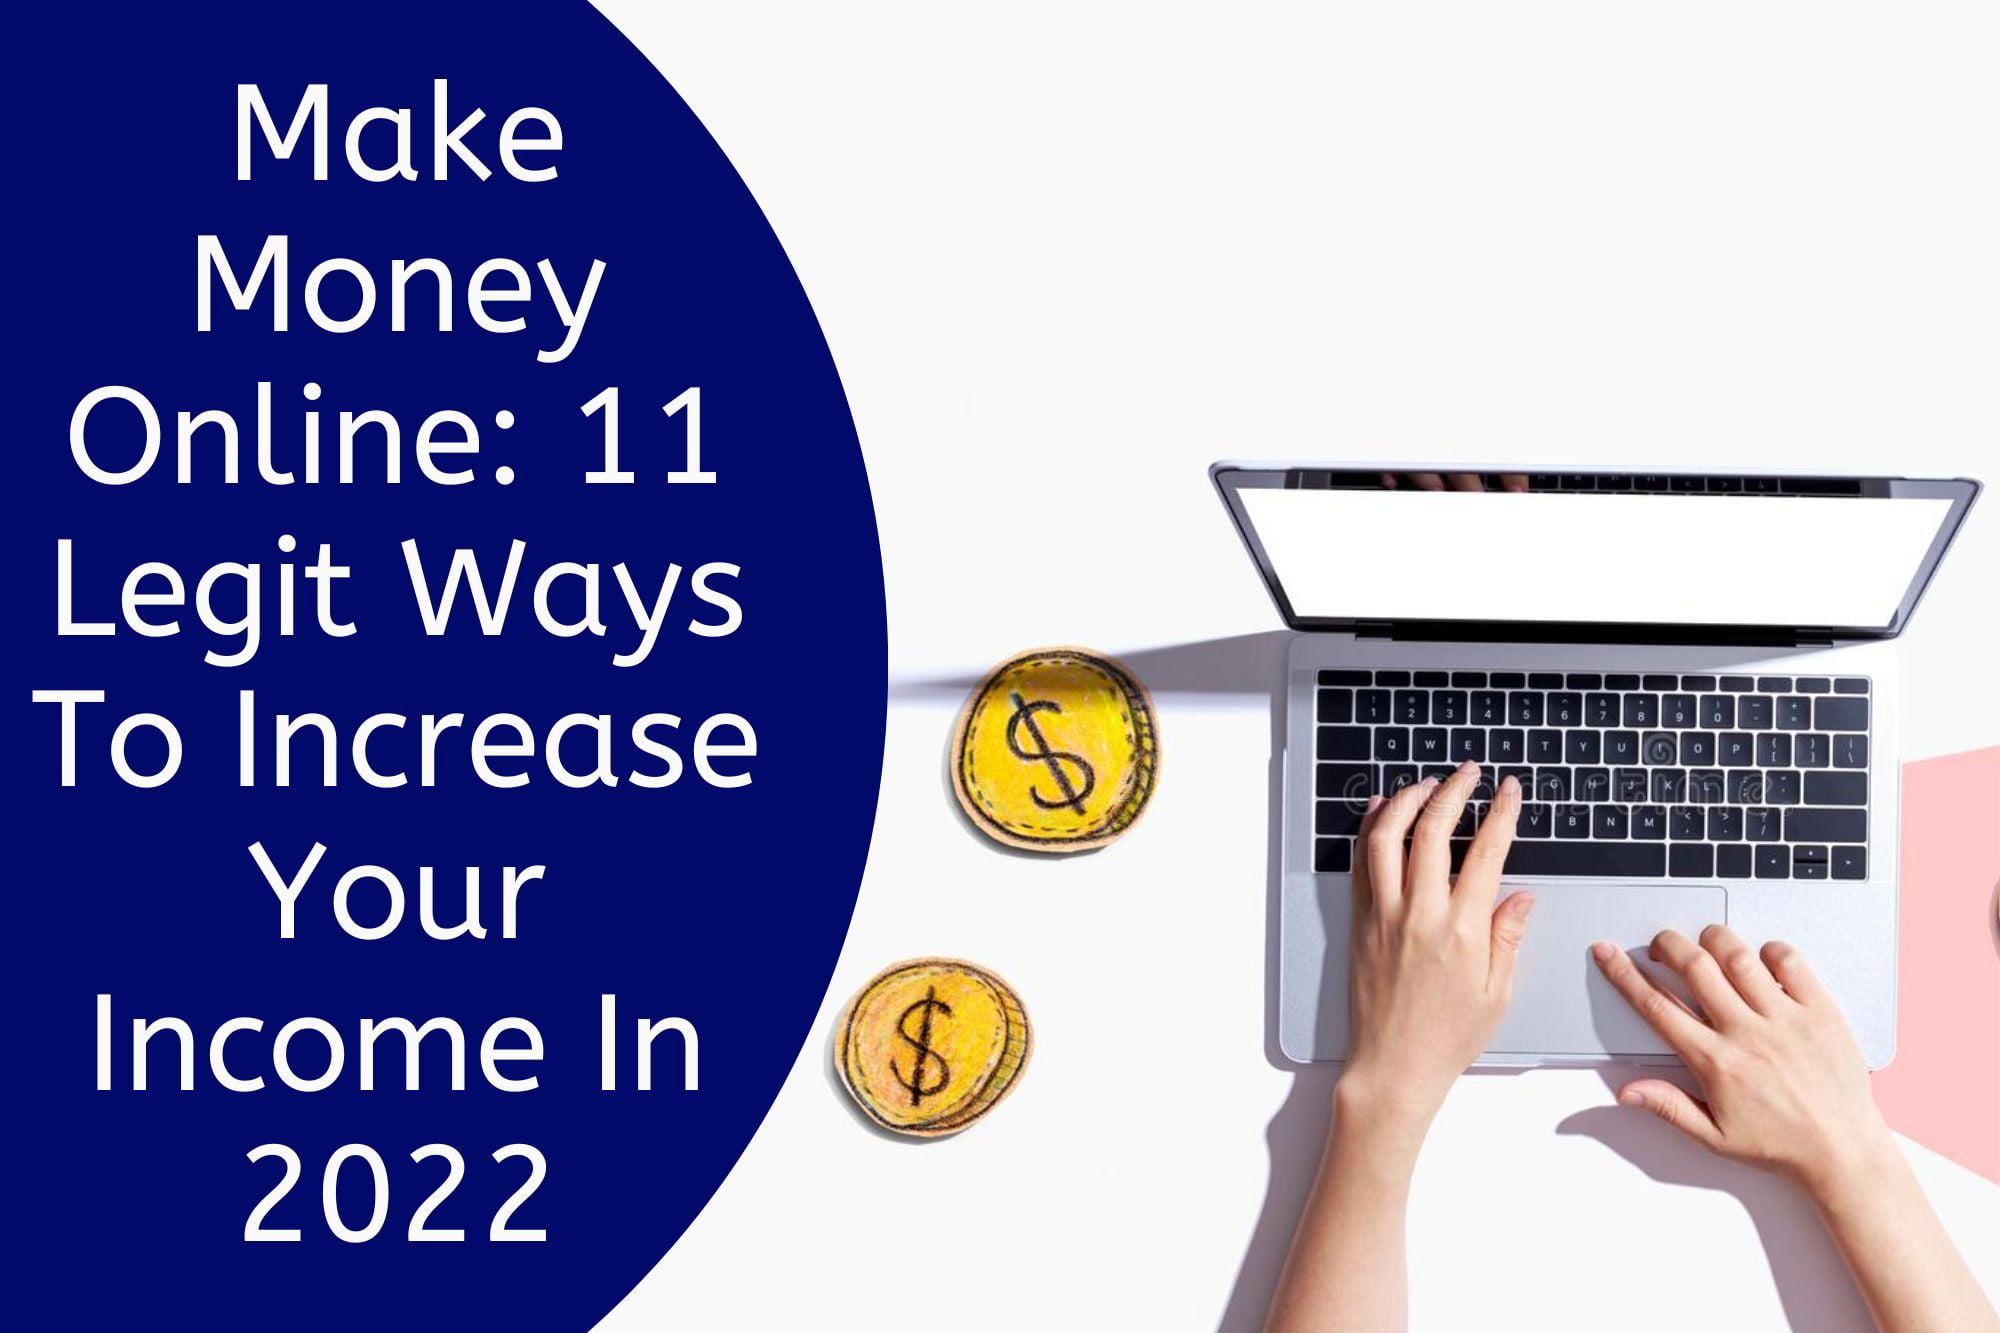 Legit Ways To Increase Your Income In 2022